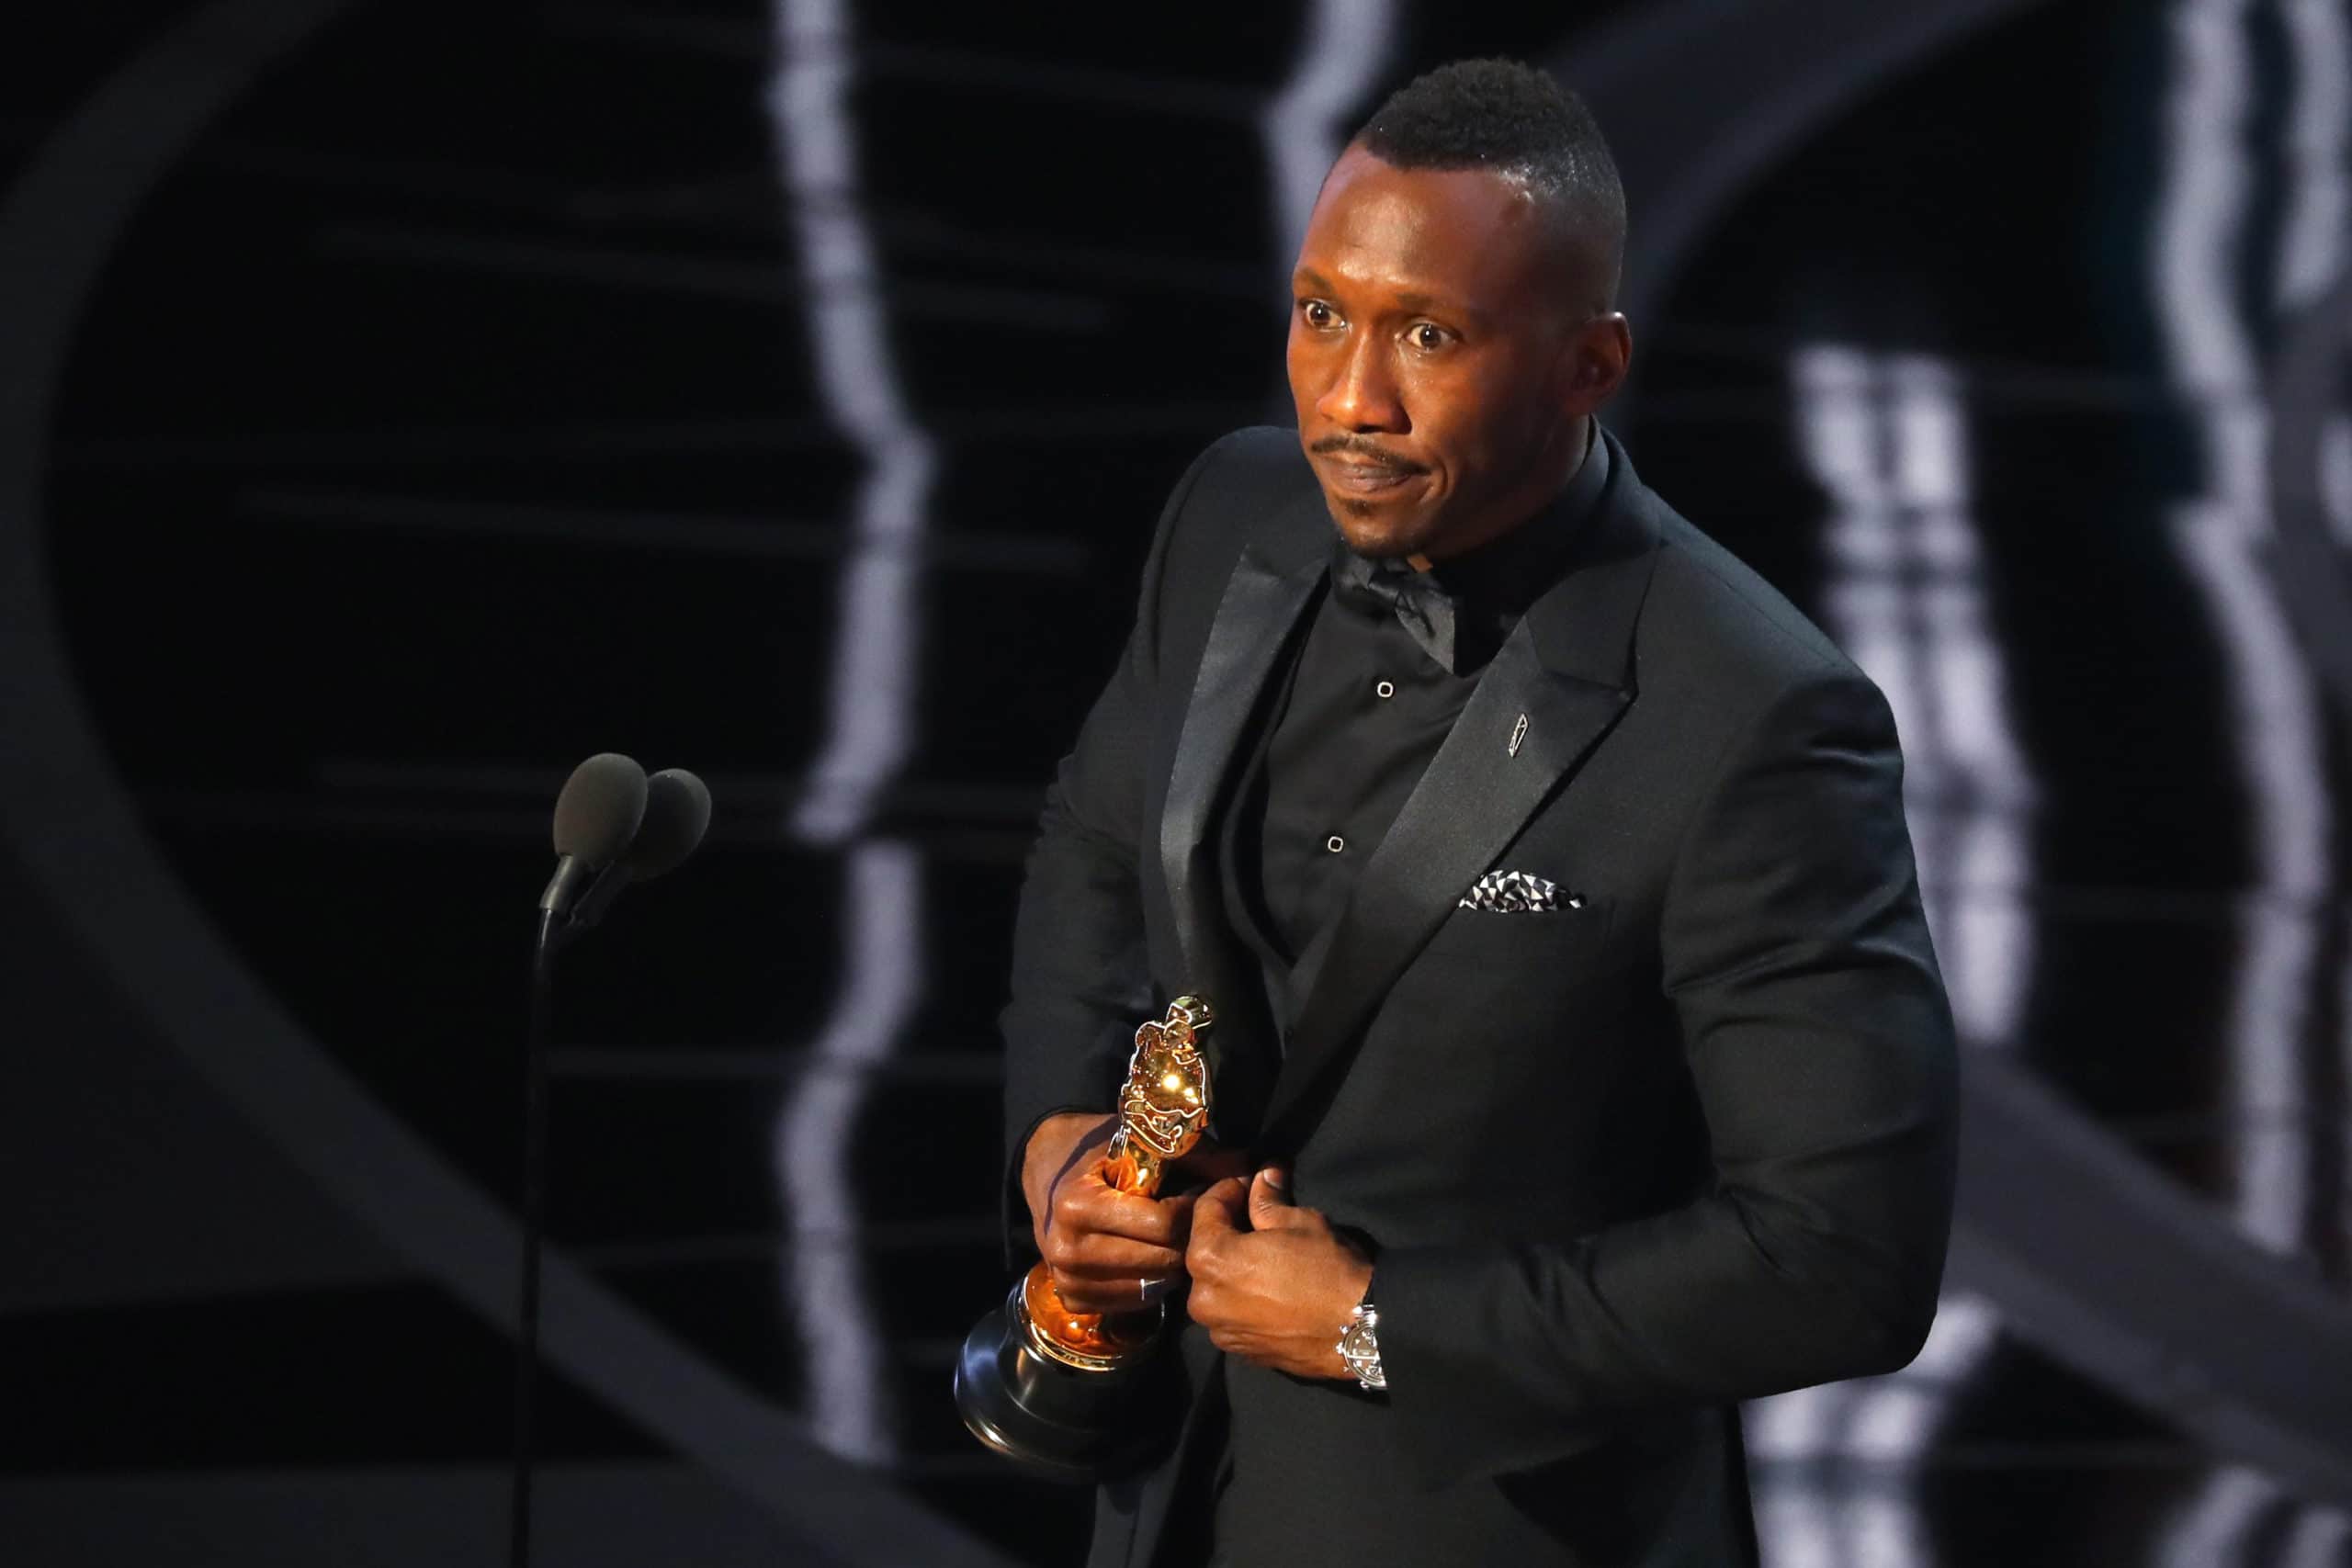 Apple signs production of new film with Mahershala Ali;  “Amazing Stories” trailer is released